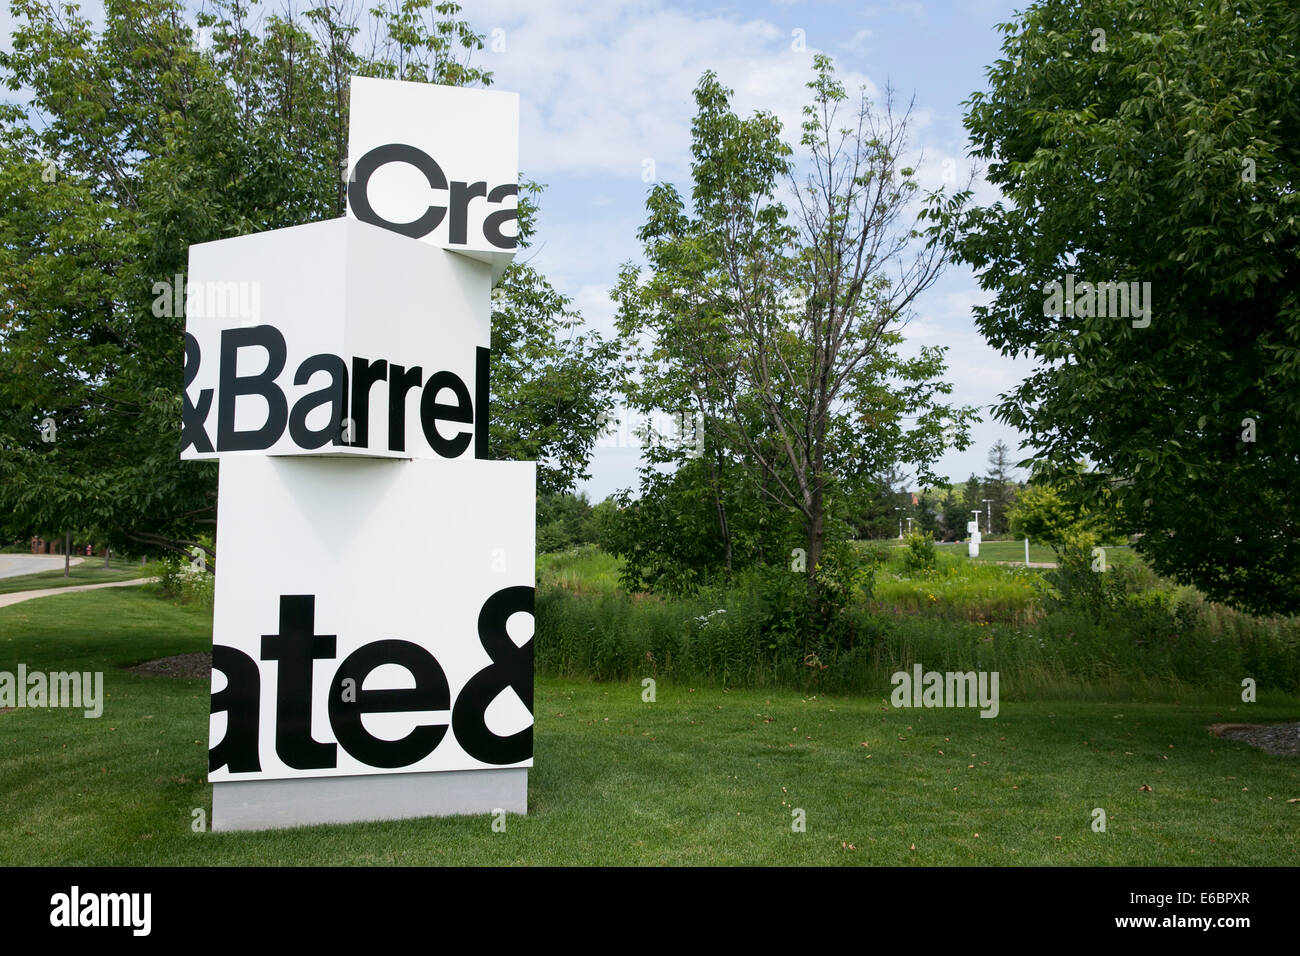 The headquarters of Euromarket Designs, Inc.., also known as Crate & Barrel, in Northbrook, Illinois. Stock Photo